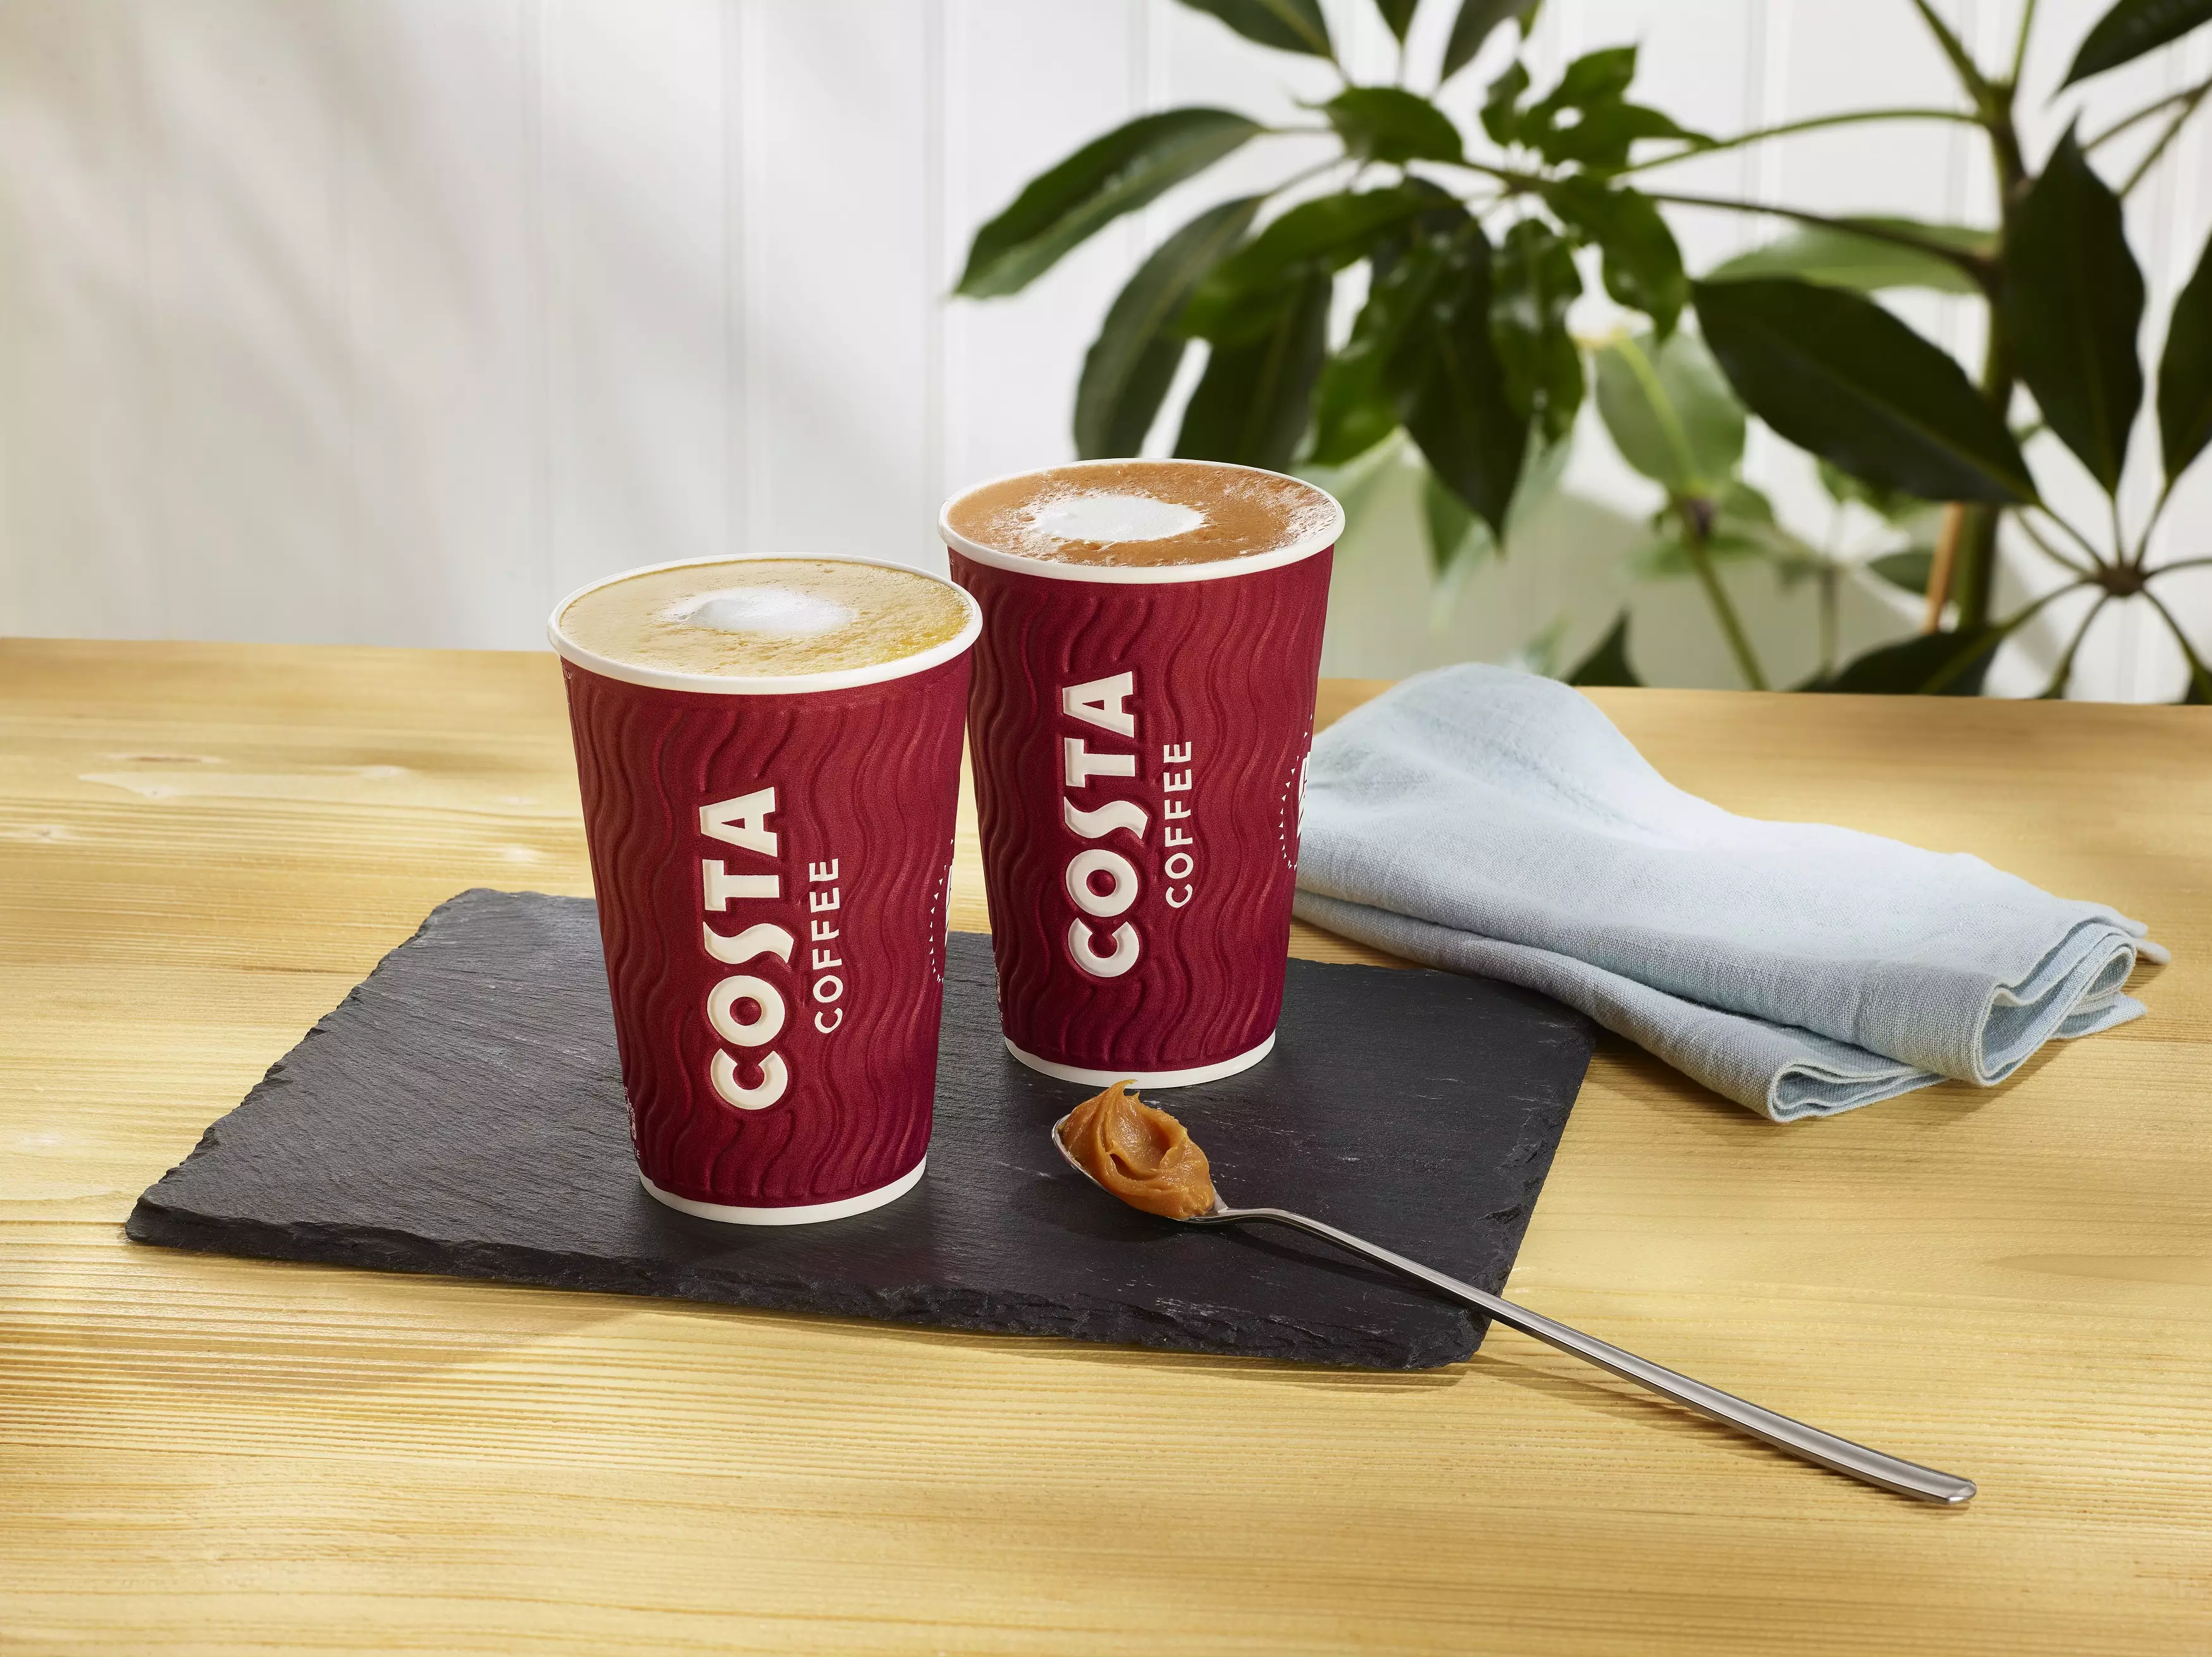 You can also bag two gold drinks from Costa Express (